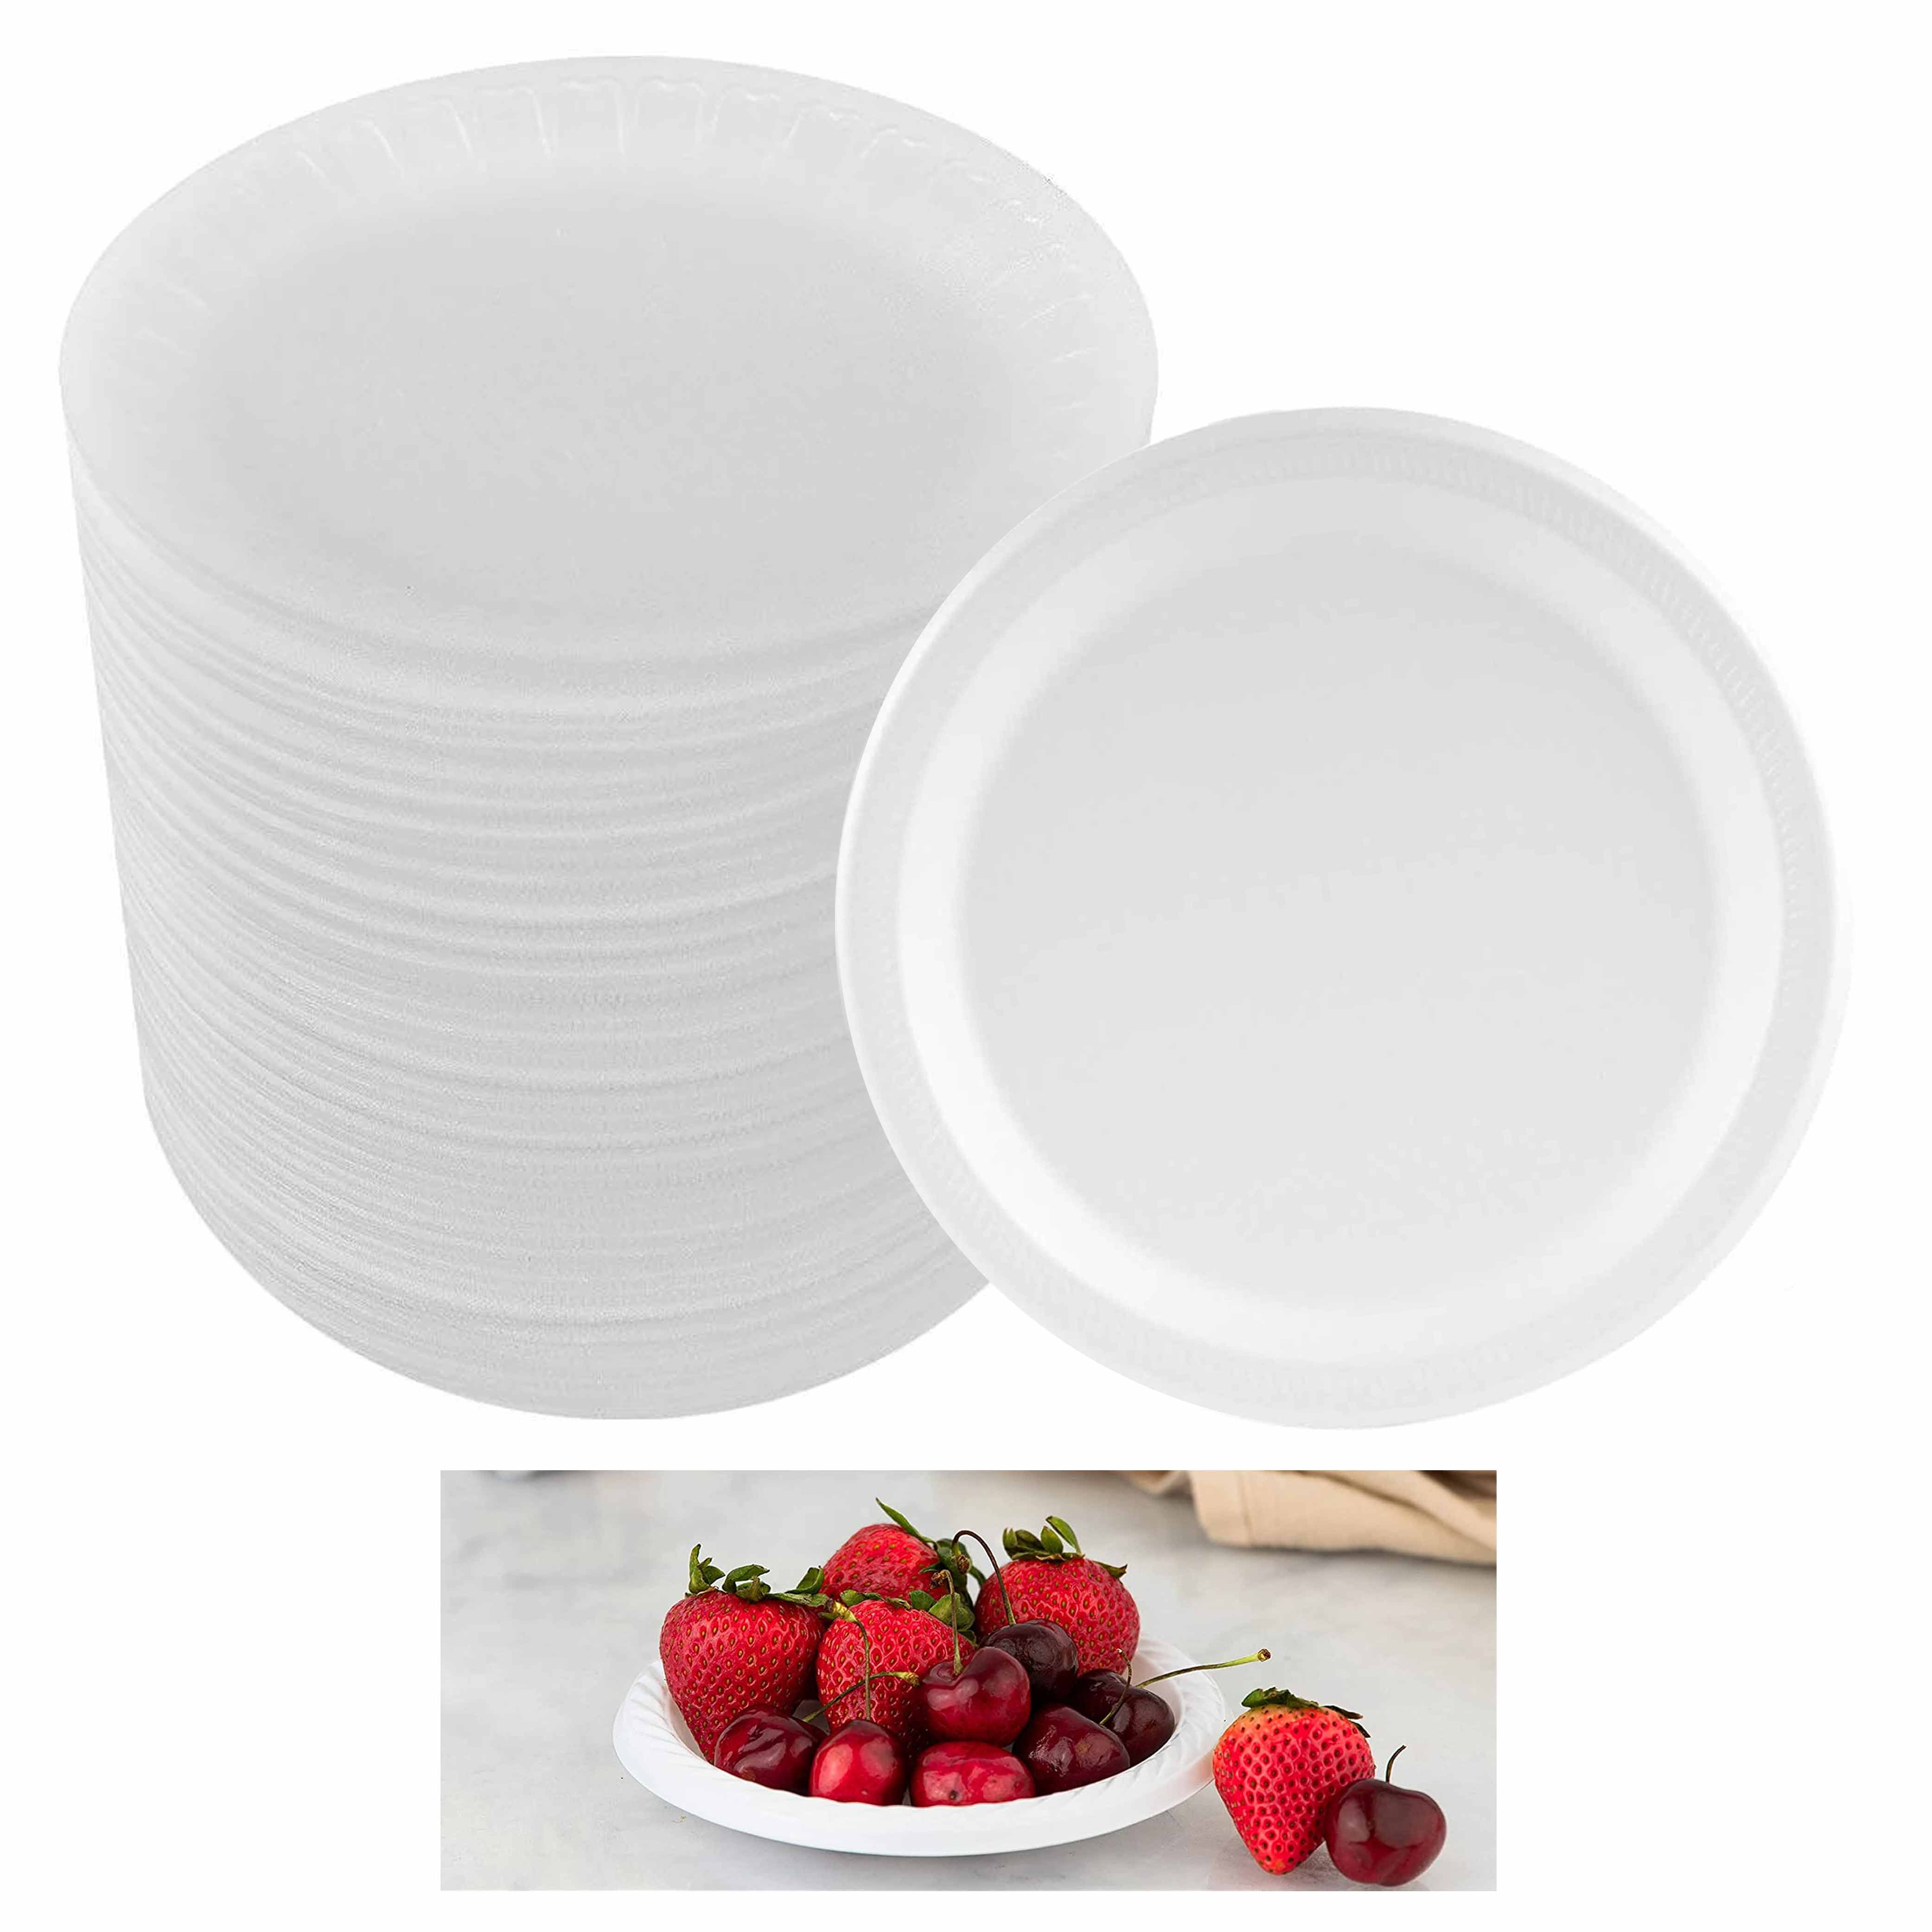 7 Foam Plates Disposable Polystyrene Plates Perfect for BBQ and parties  18cm